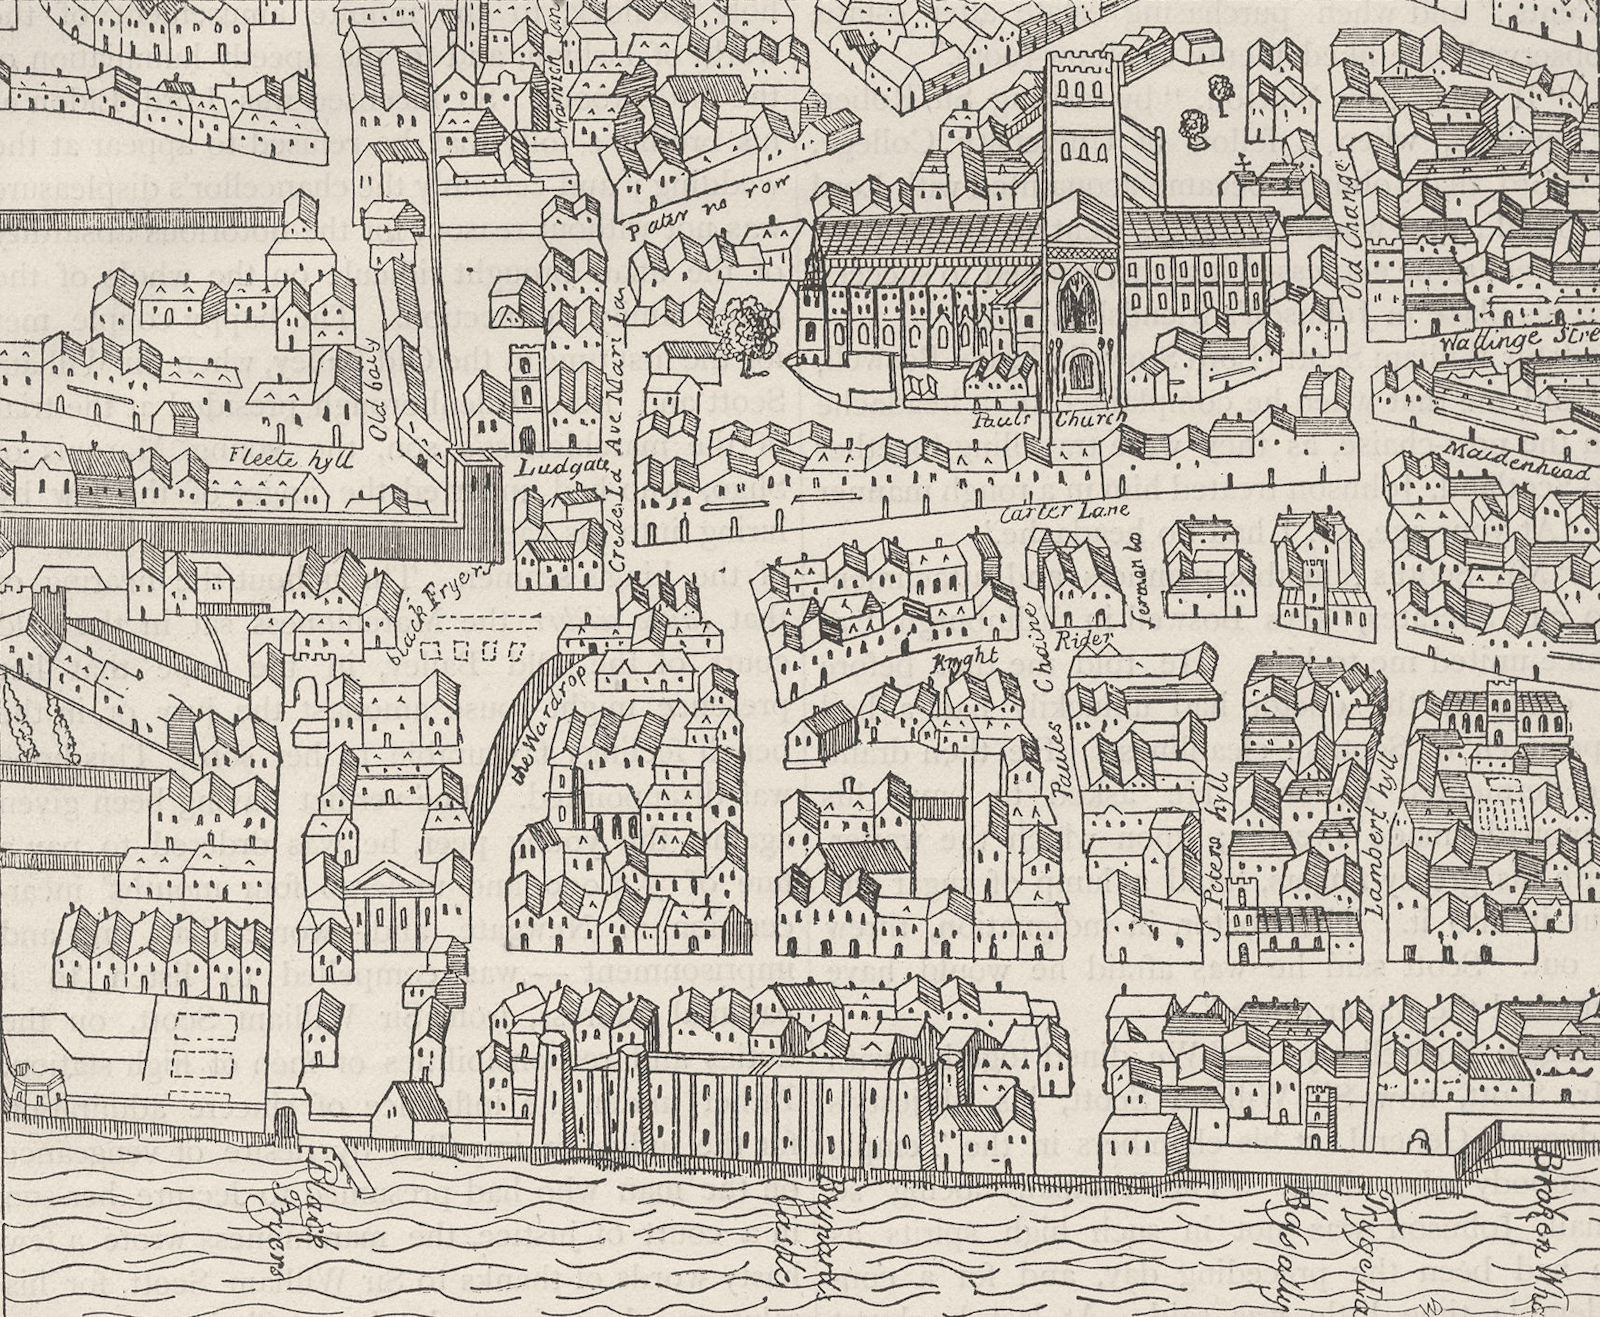 CITY OF LONDON. St. Paul's & neighbourhood (from Aggas's plan, 1563) c1880 map